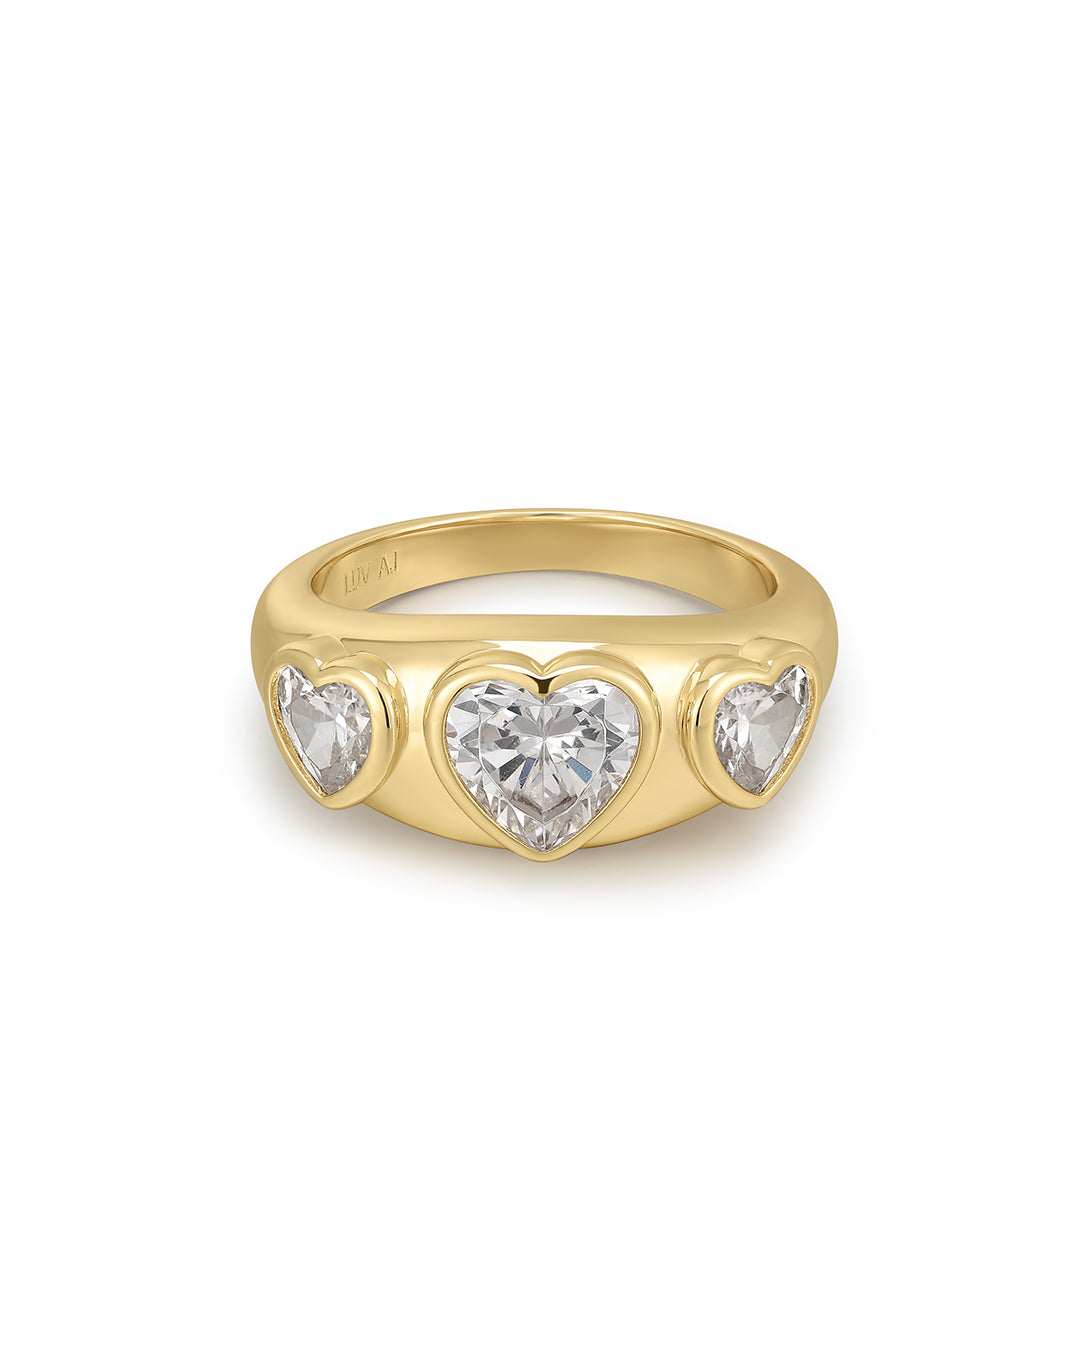 Luv Aj Bezel Heart Signet Multi Stone Ring in 14k Gold Plated in Clear CZ Size 6